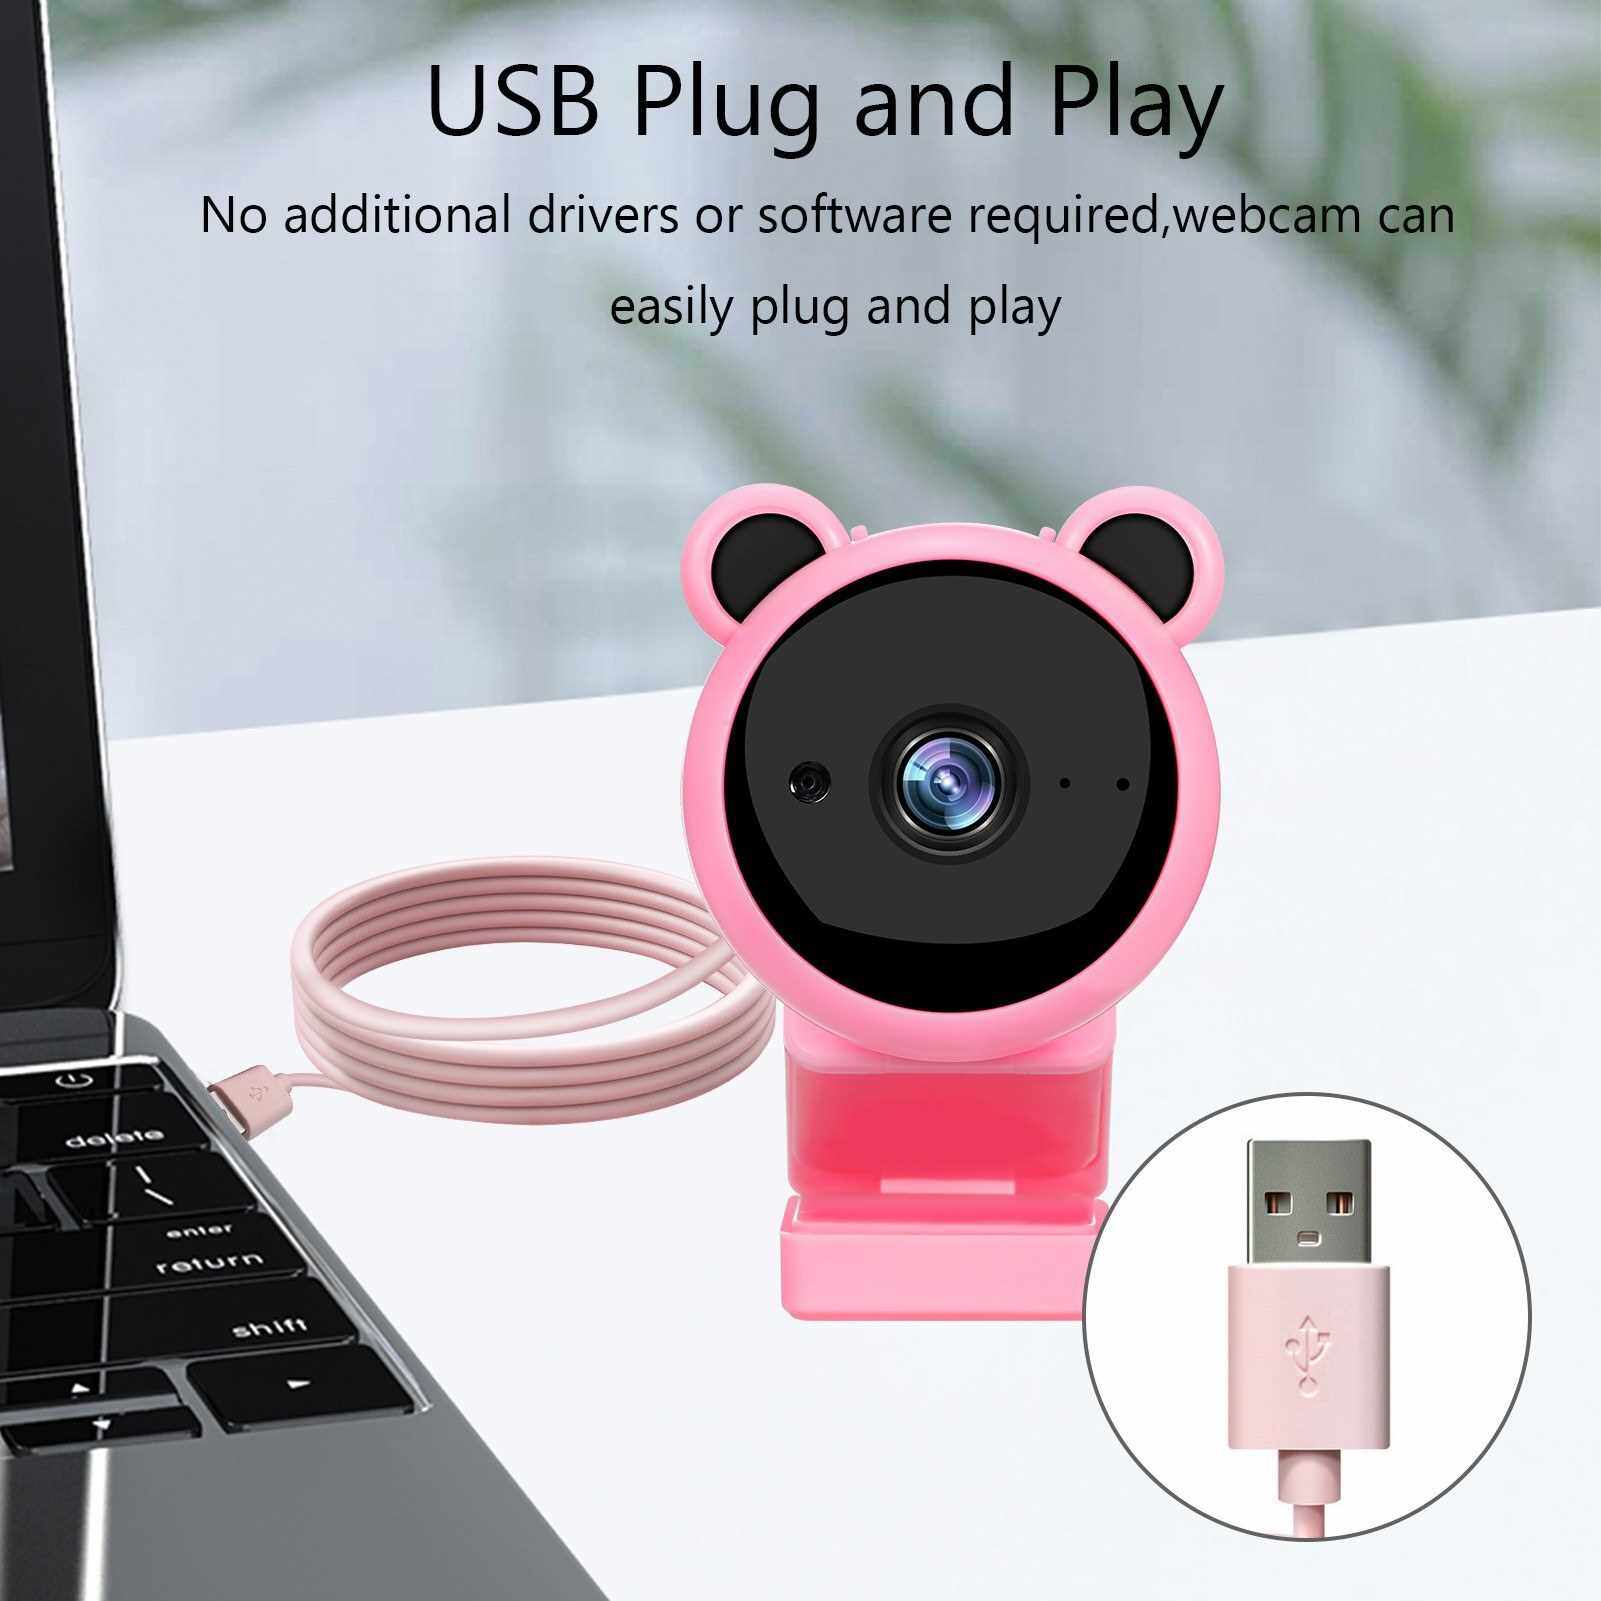 1080P Webcam with Microphone, USB 2.0 Desktop Laptop Computer USB Camera Plug and Play, for Video Streaming, Conference, Gaming, Online Teaching (Pink)